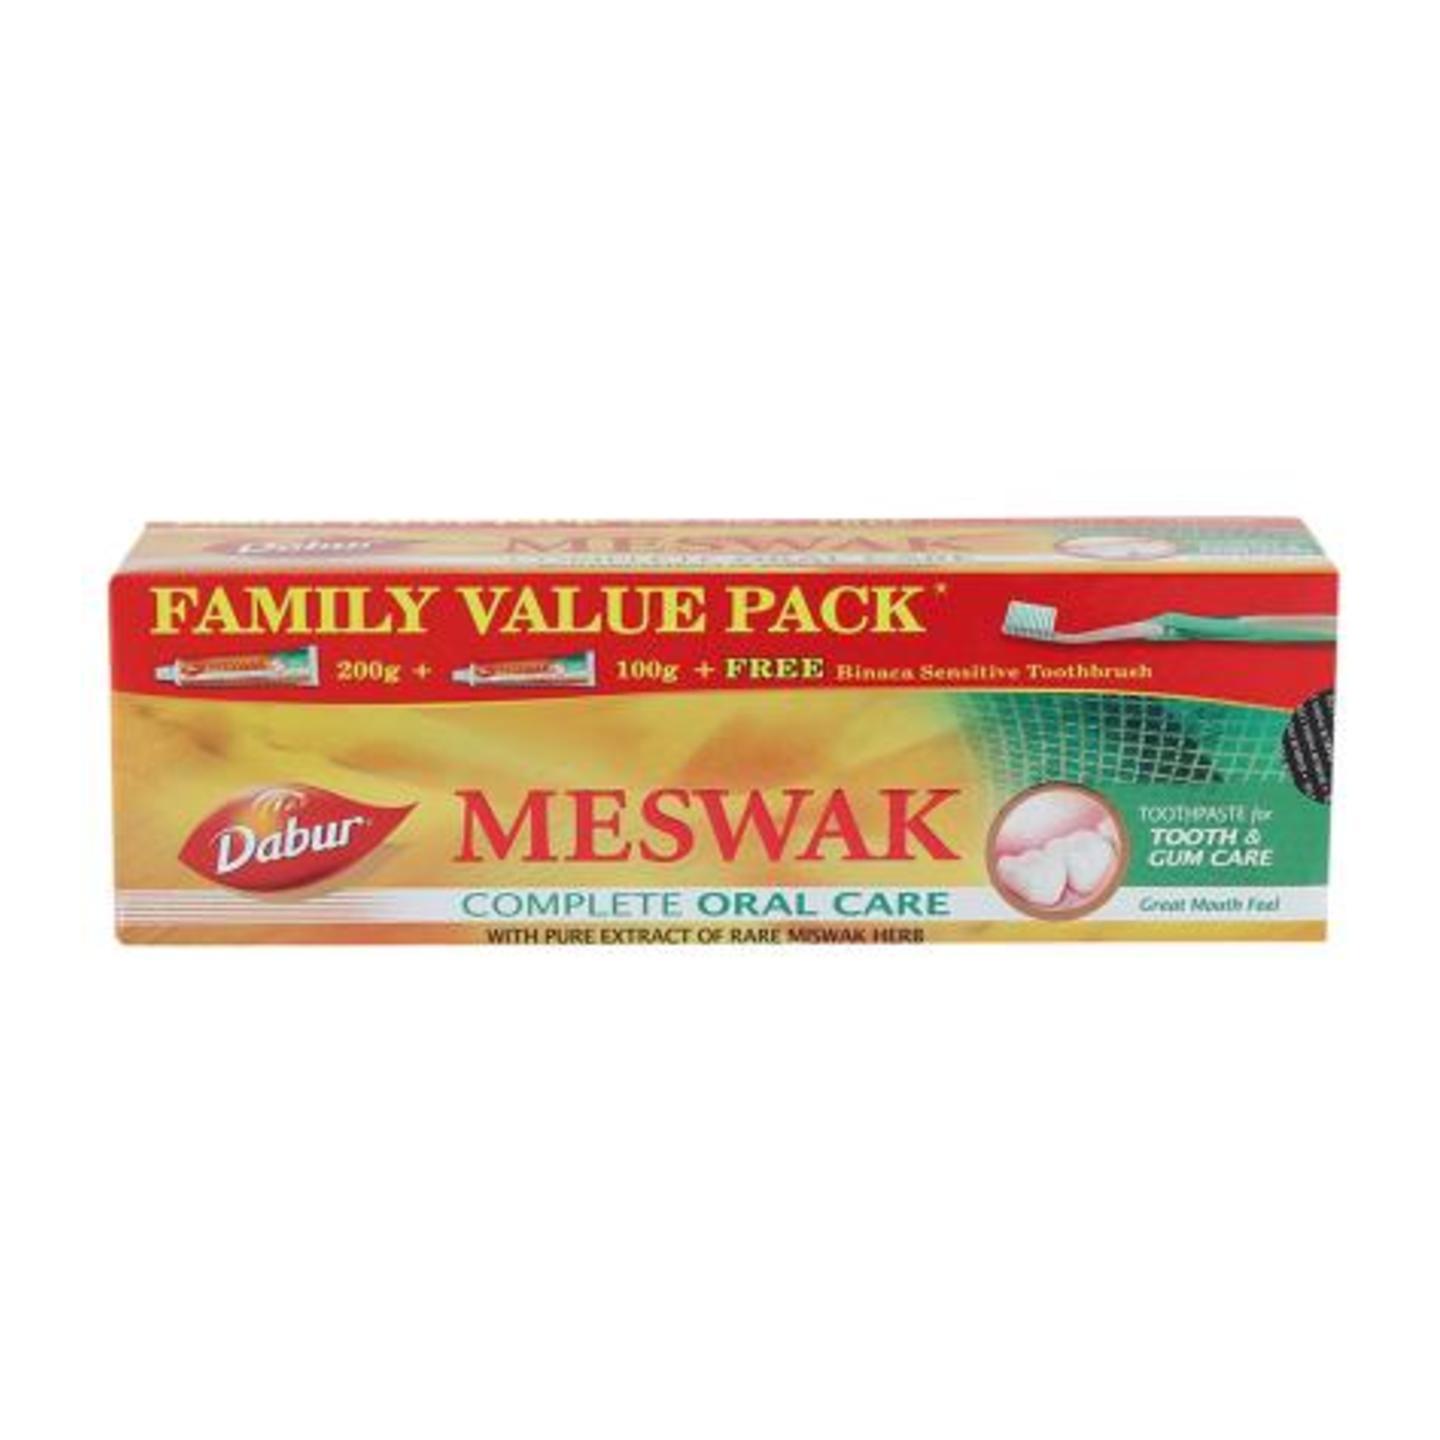 Meswak Complete Oral Care Family Pack Toothpaste (200+ 100) g PM/BM 0.125/15